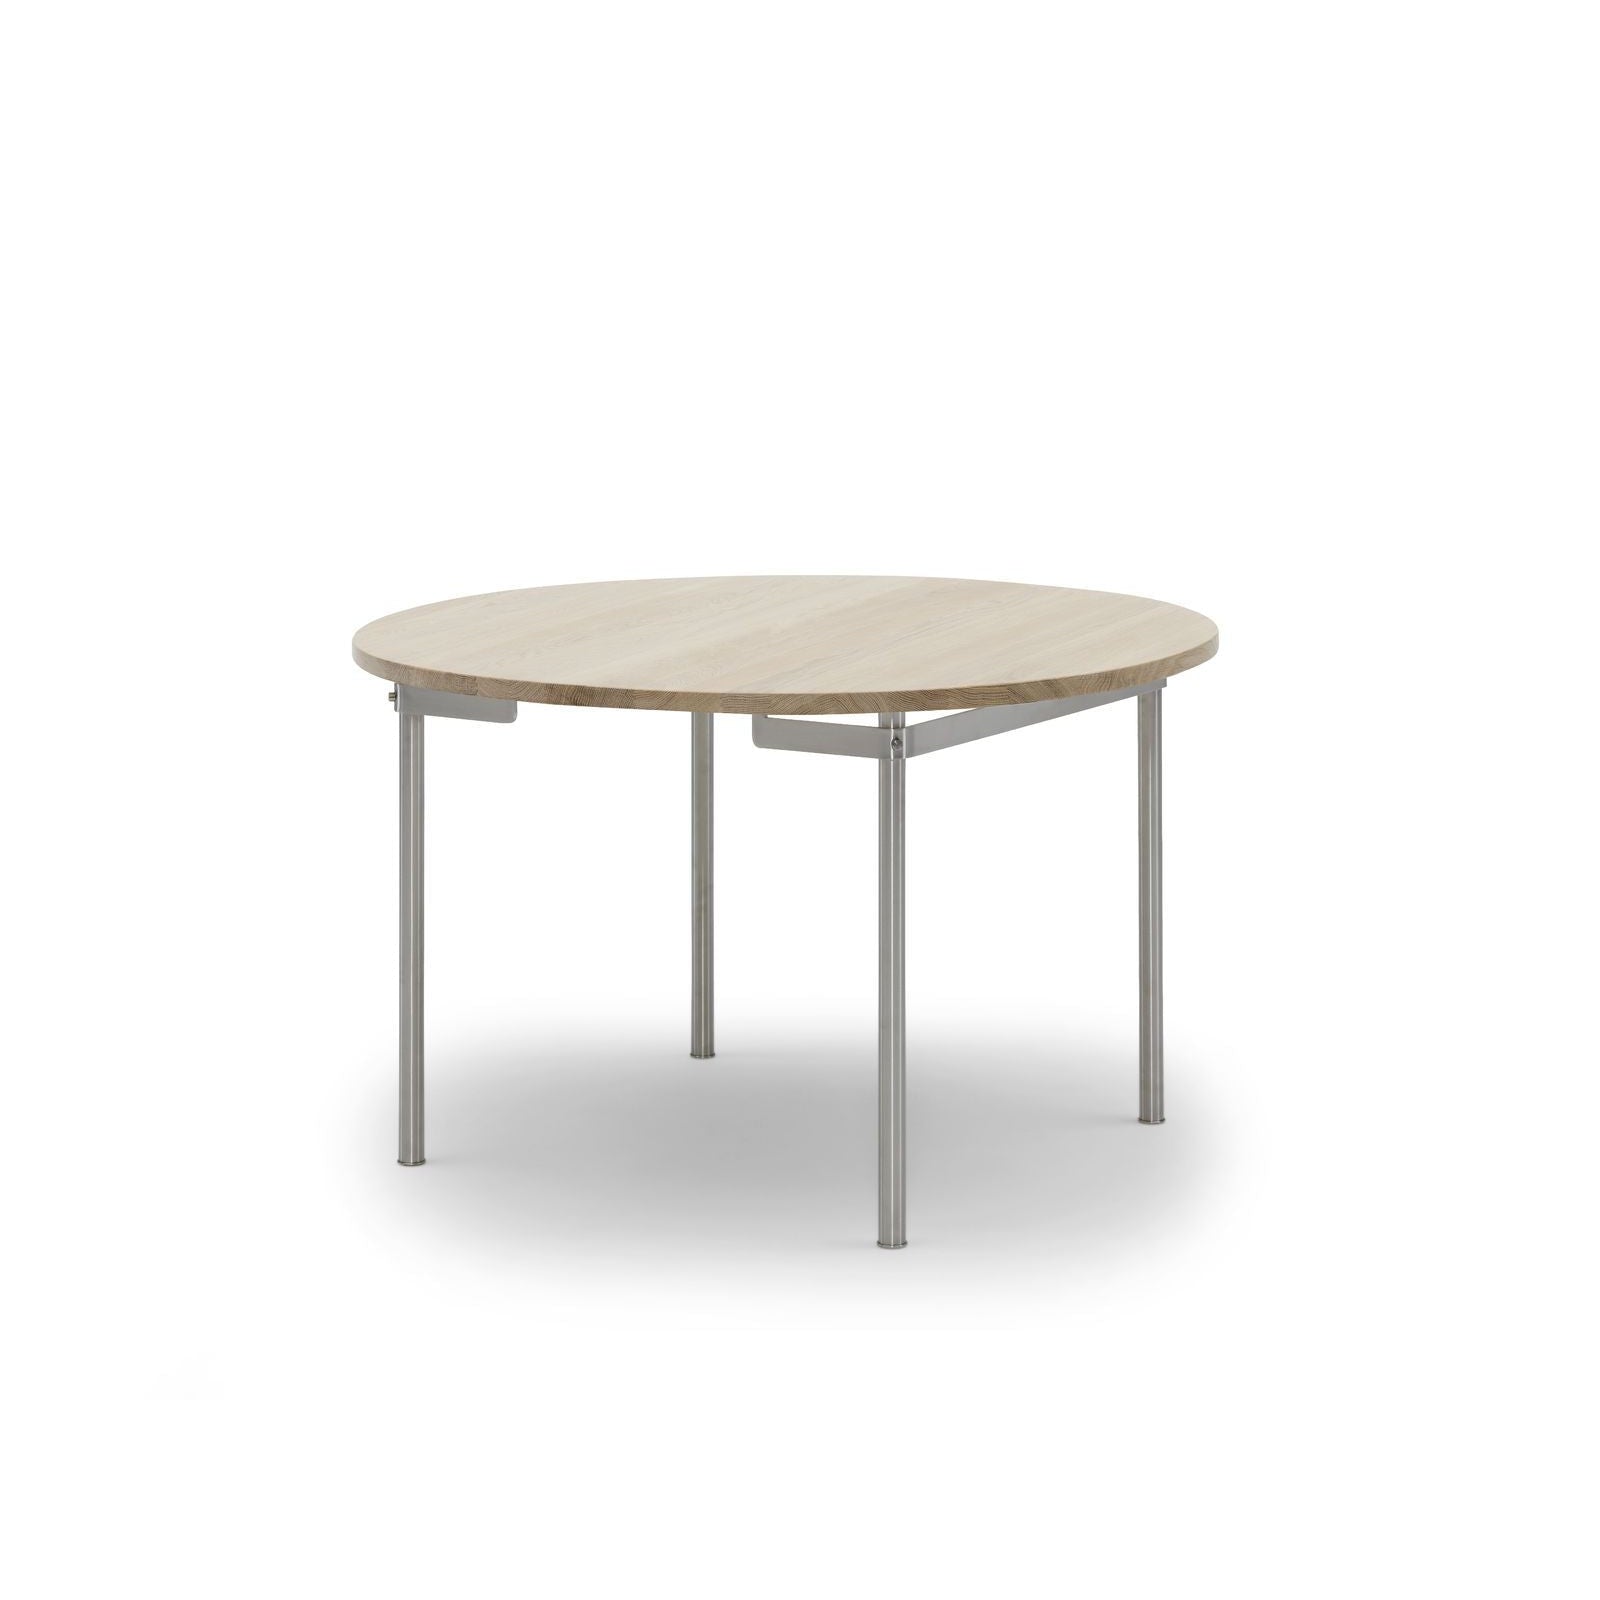 Carl Hansen Ch388 Dining Table Stainless Steel Without Additional Plates, White Oiled Oak